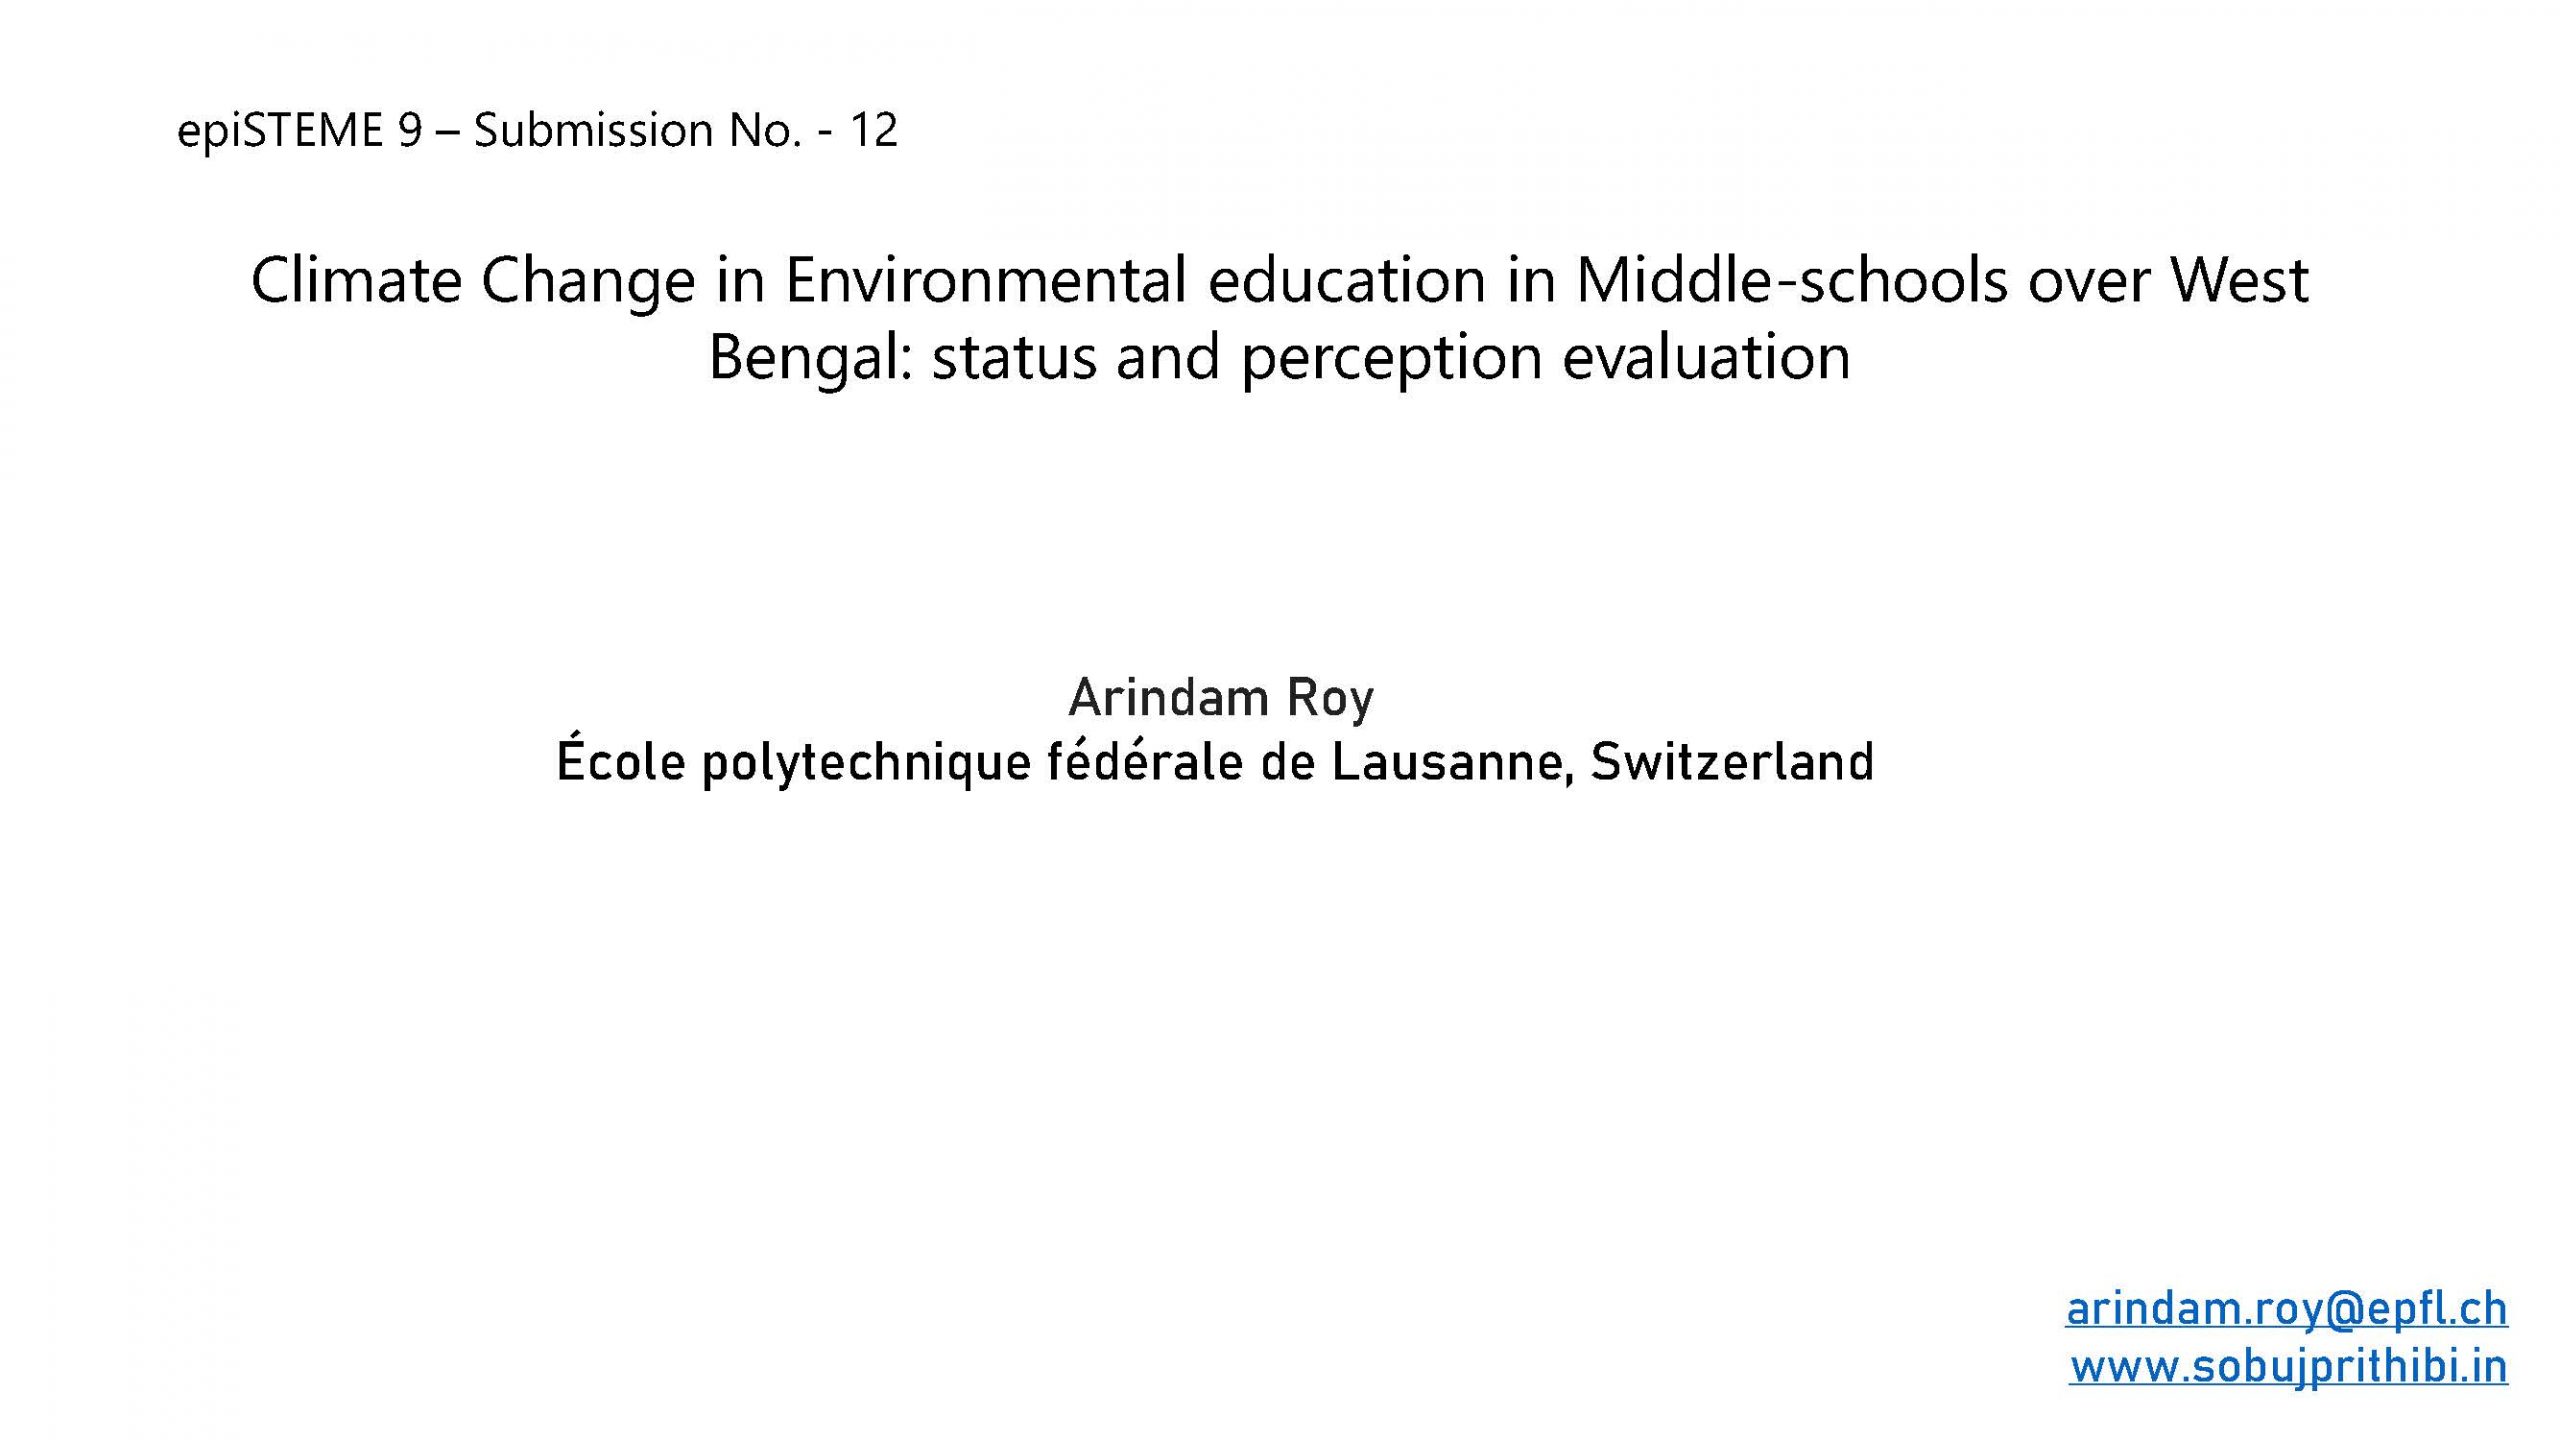 Climate Change in Environmental education in Middle schools over West Bengal: status and perception evaluation